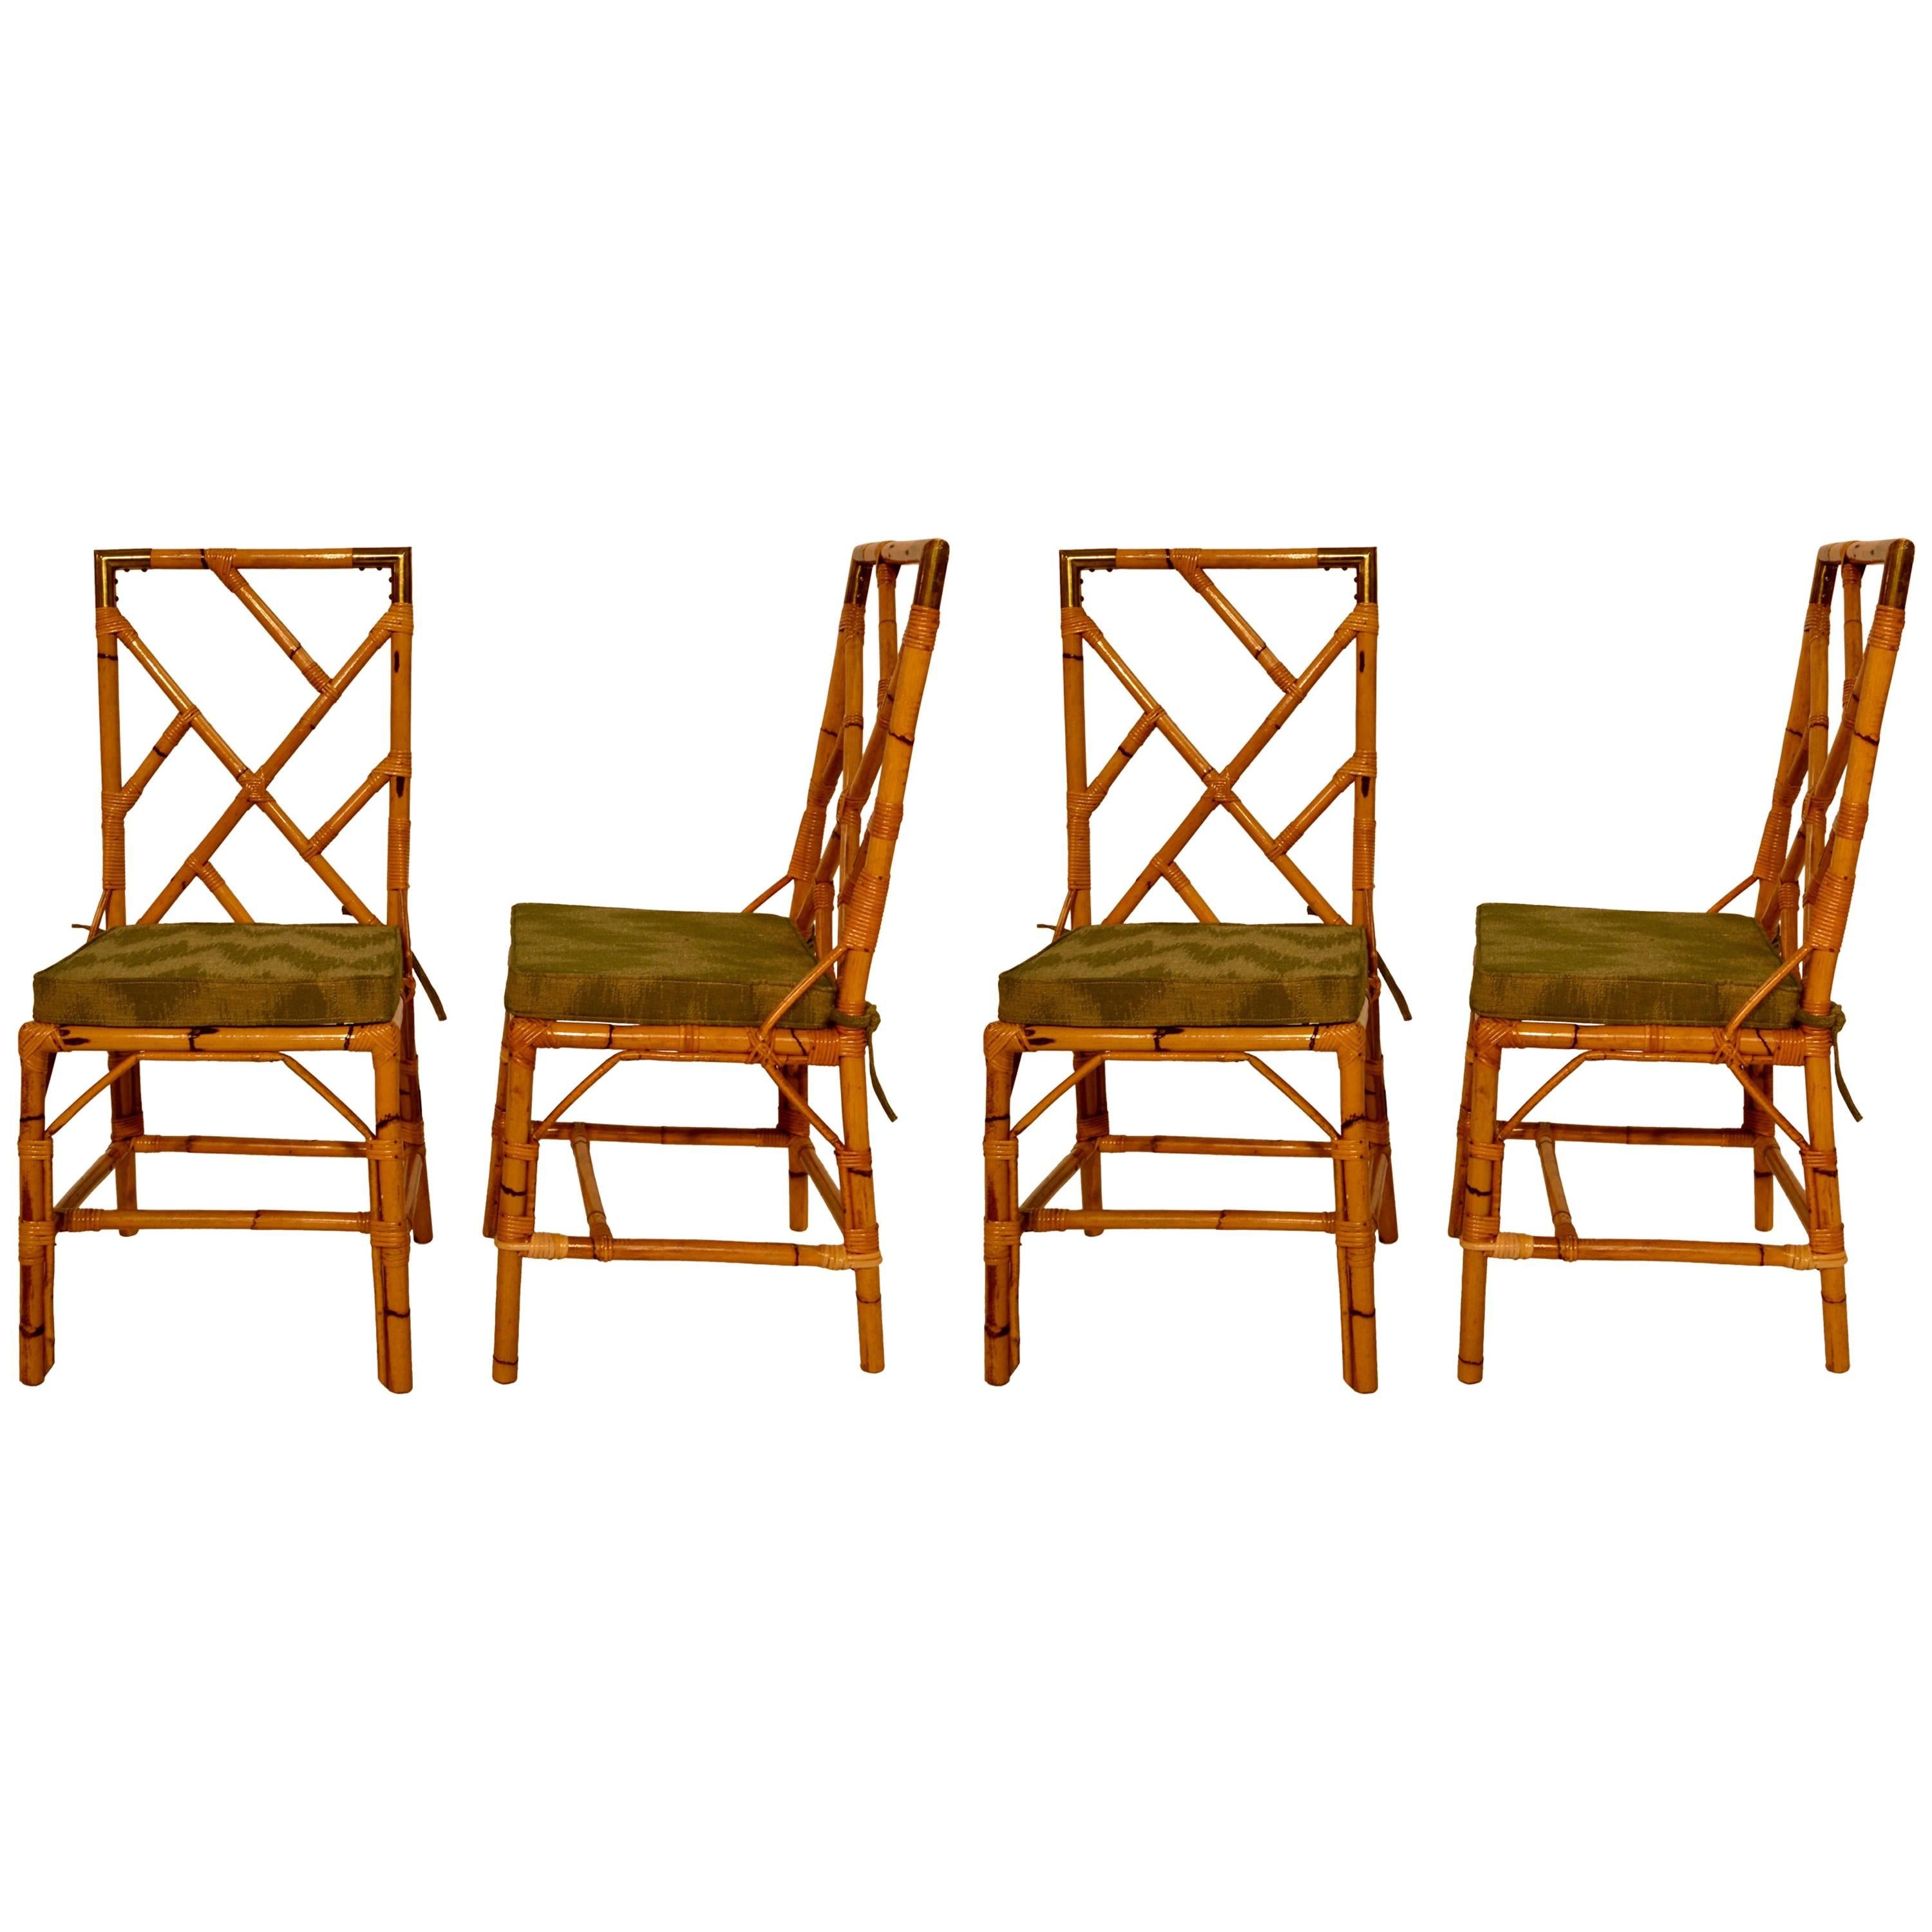 Four Chairs in Bamboo and Brass Details